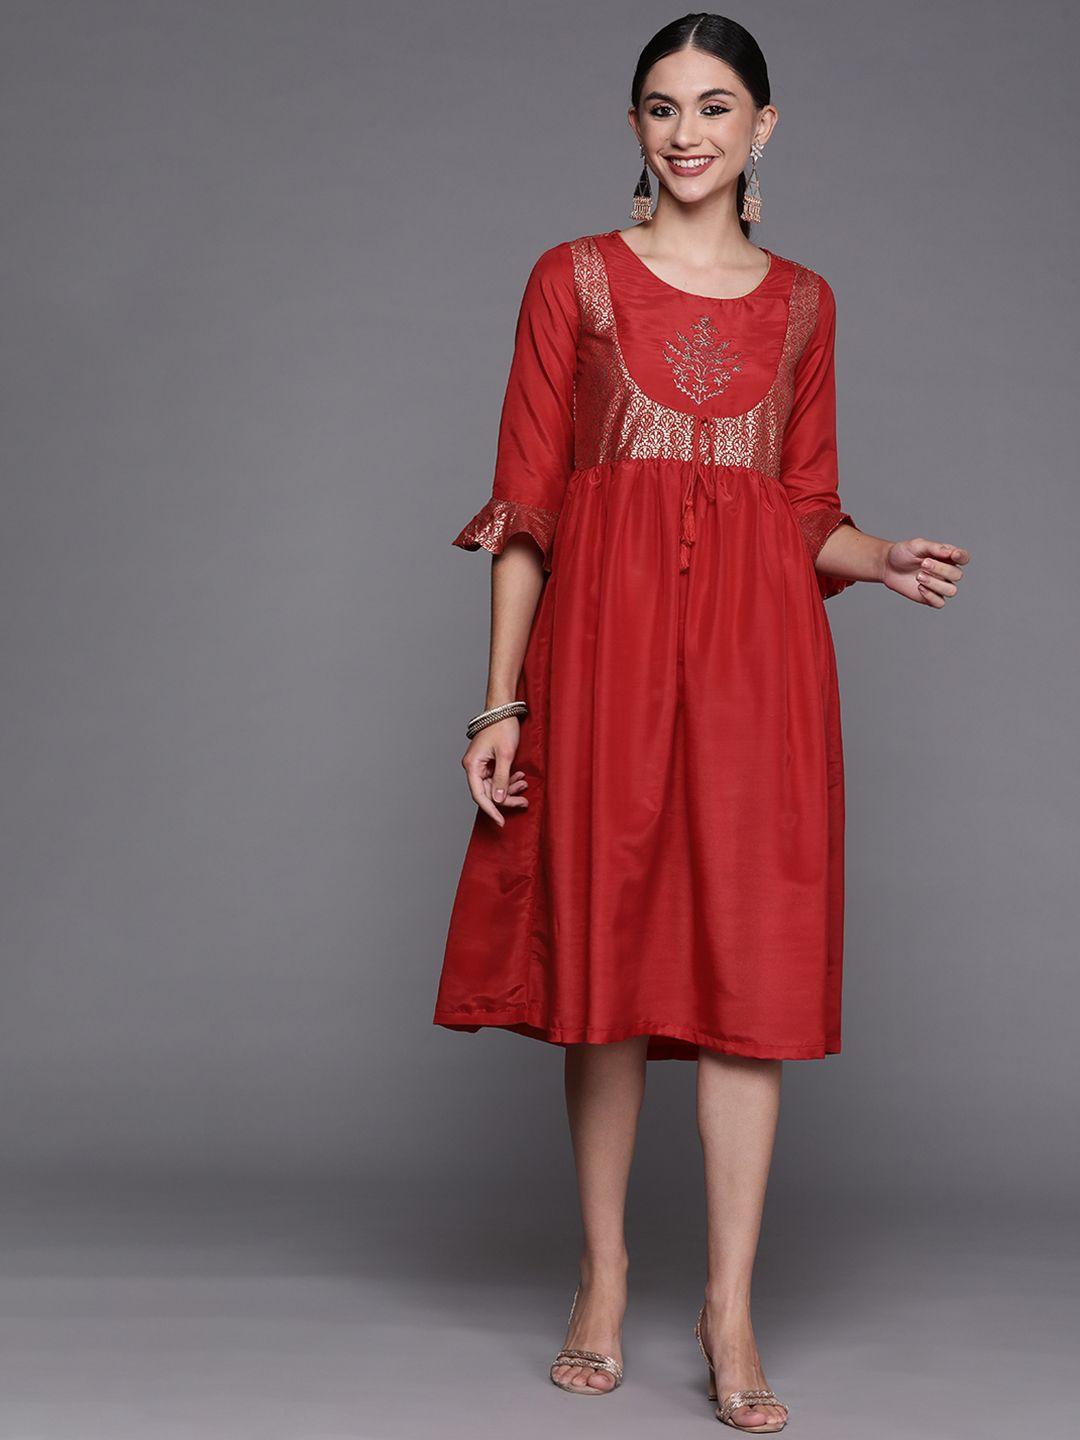 biba-red-&-golden-ethnic-motifs-printed-embroidered-detail-a-line-midi-dress